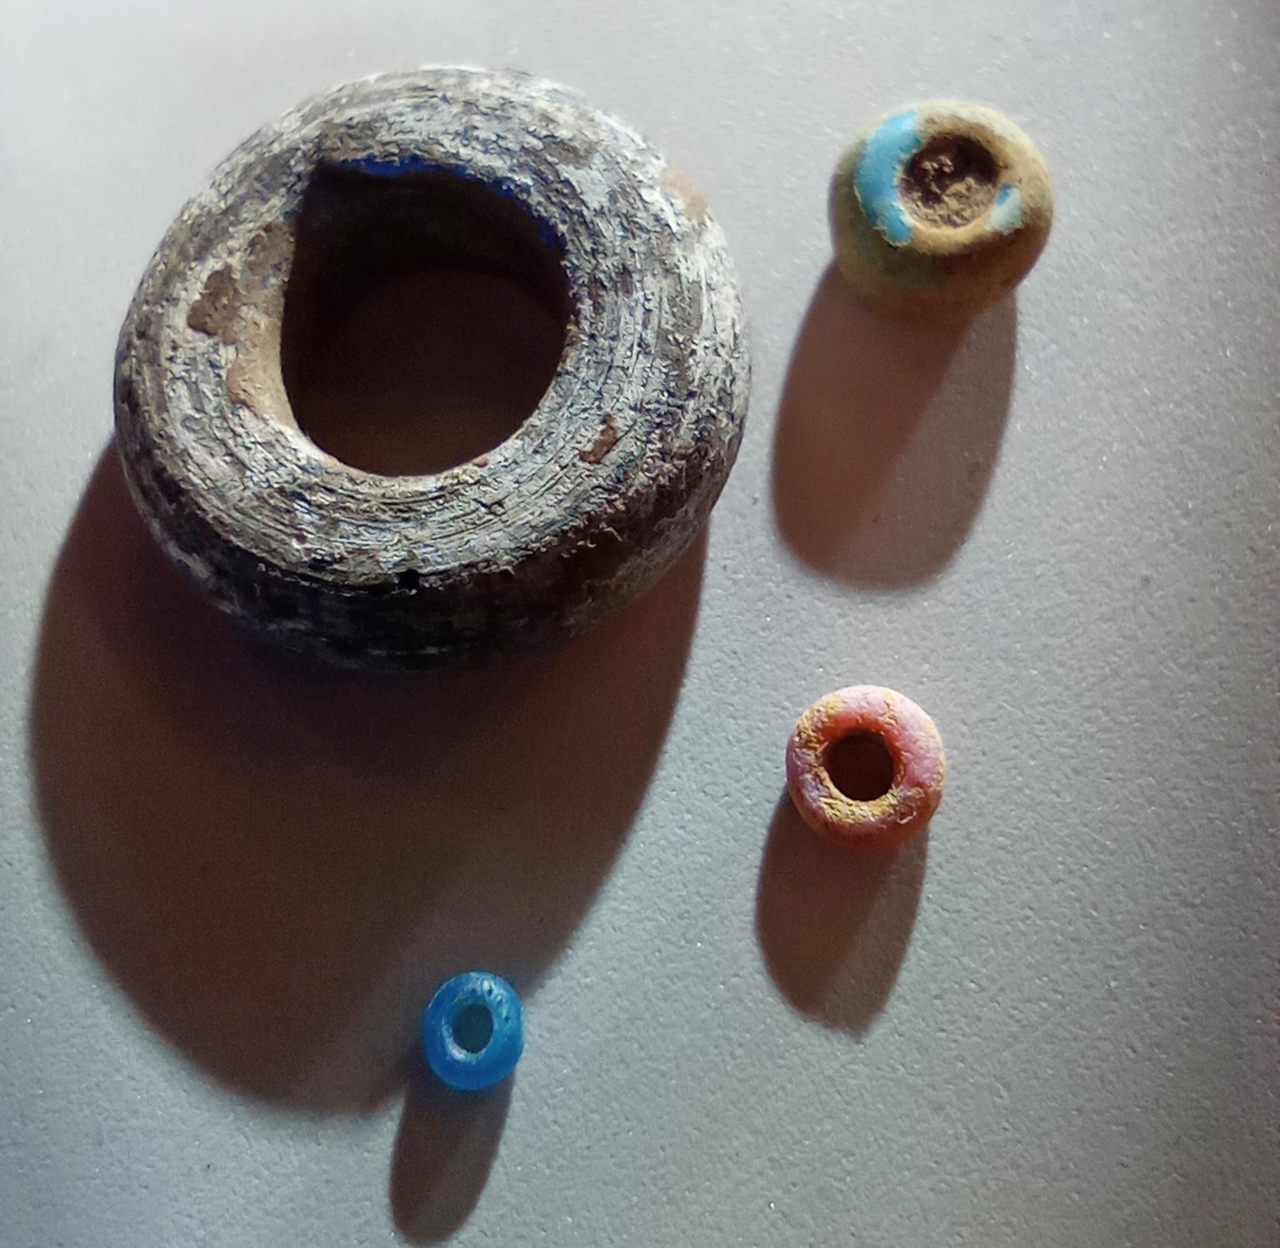 These four beads were found in the Kasitu Valley in northern Malawi. The biggest is about the size of a Cheerio, while the smallest is the size of a grain of rice.